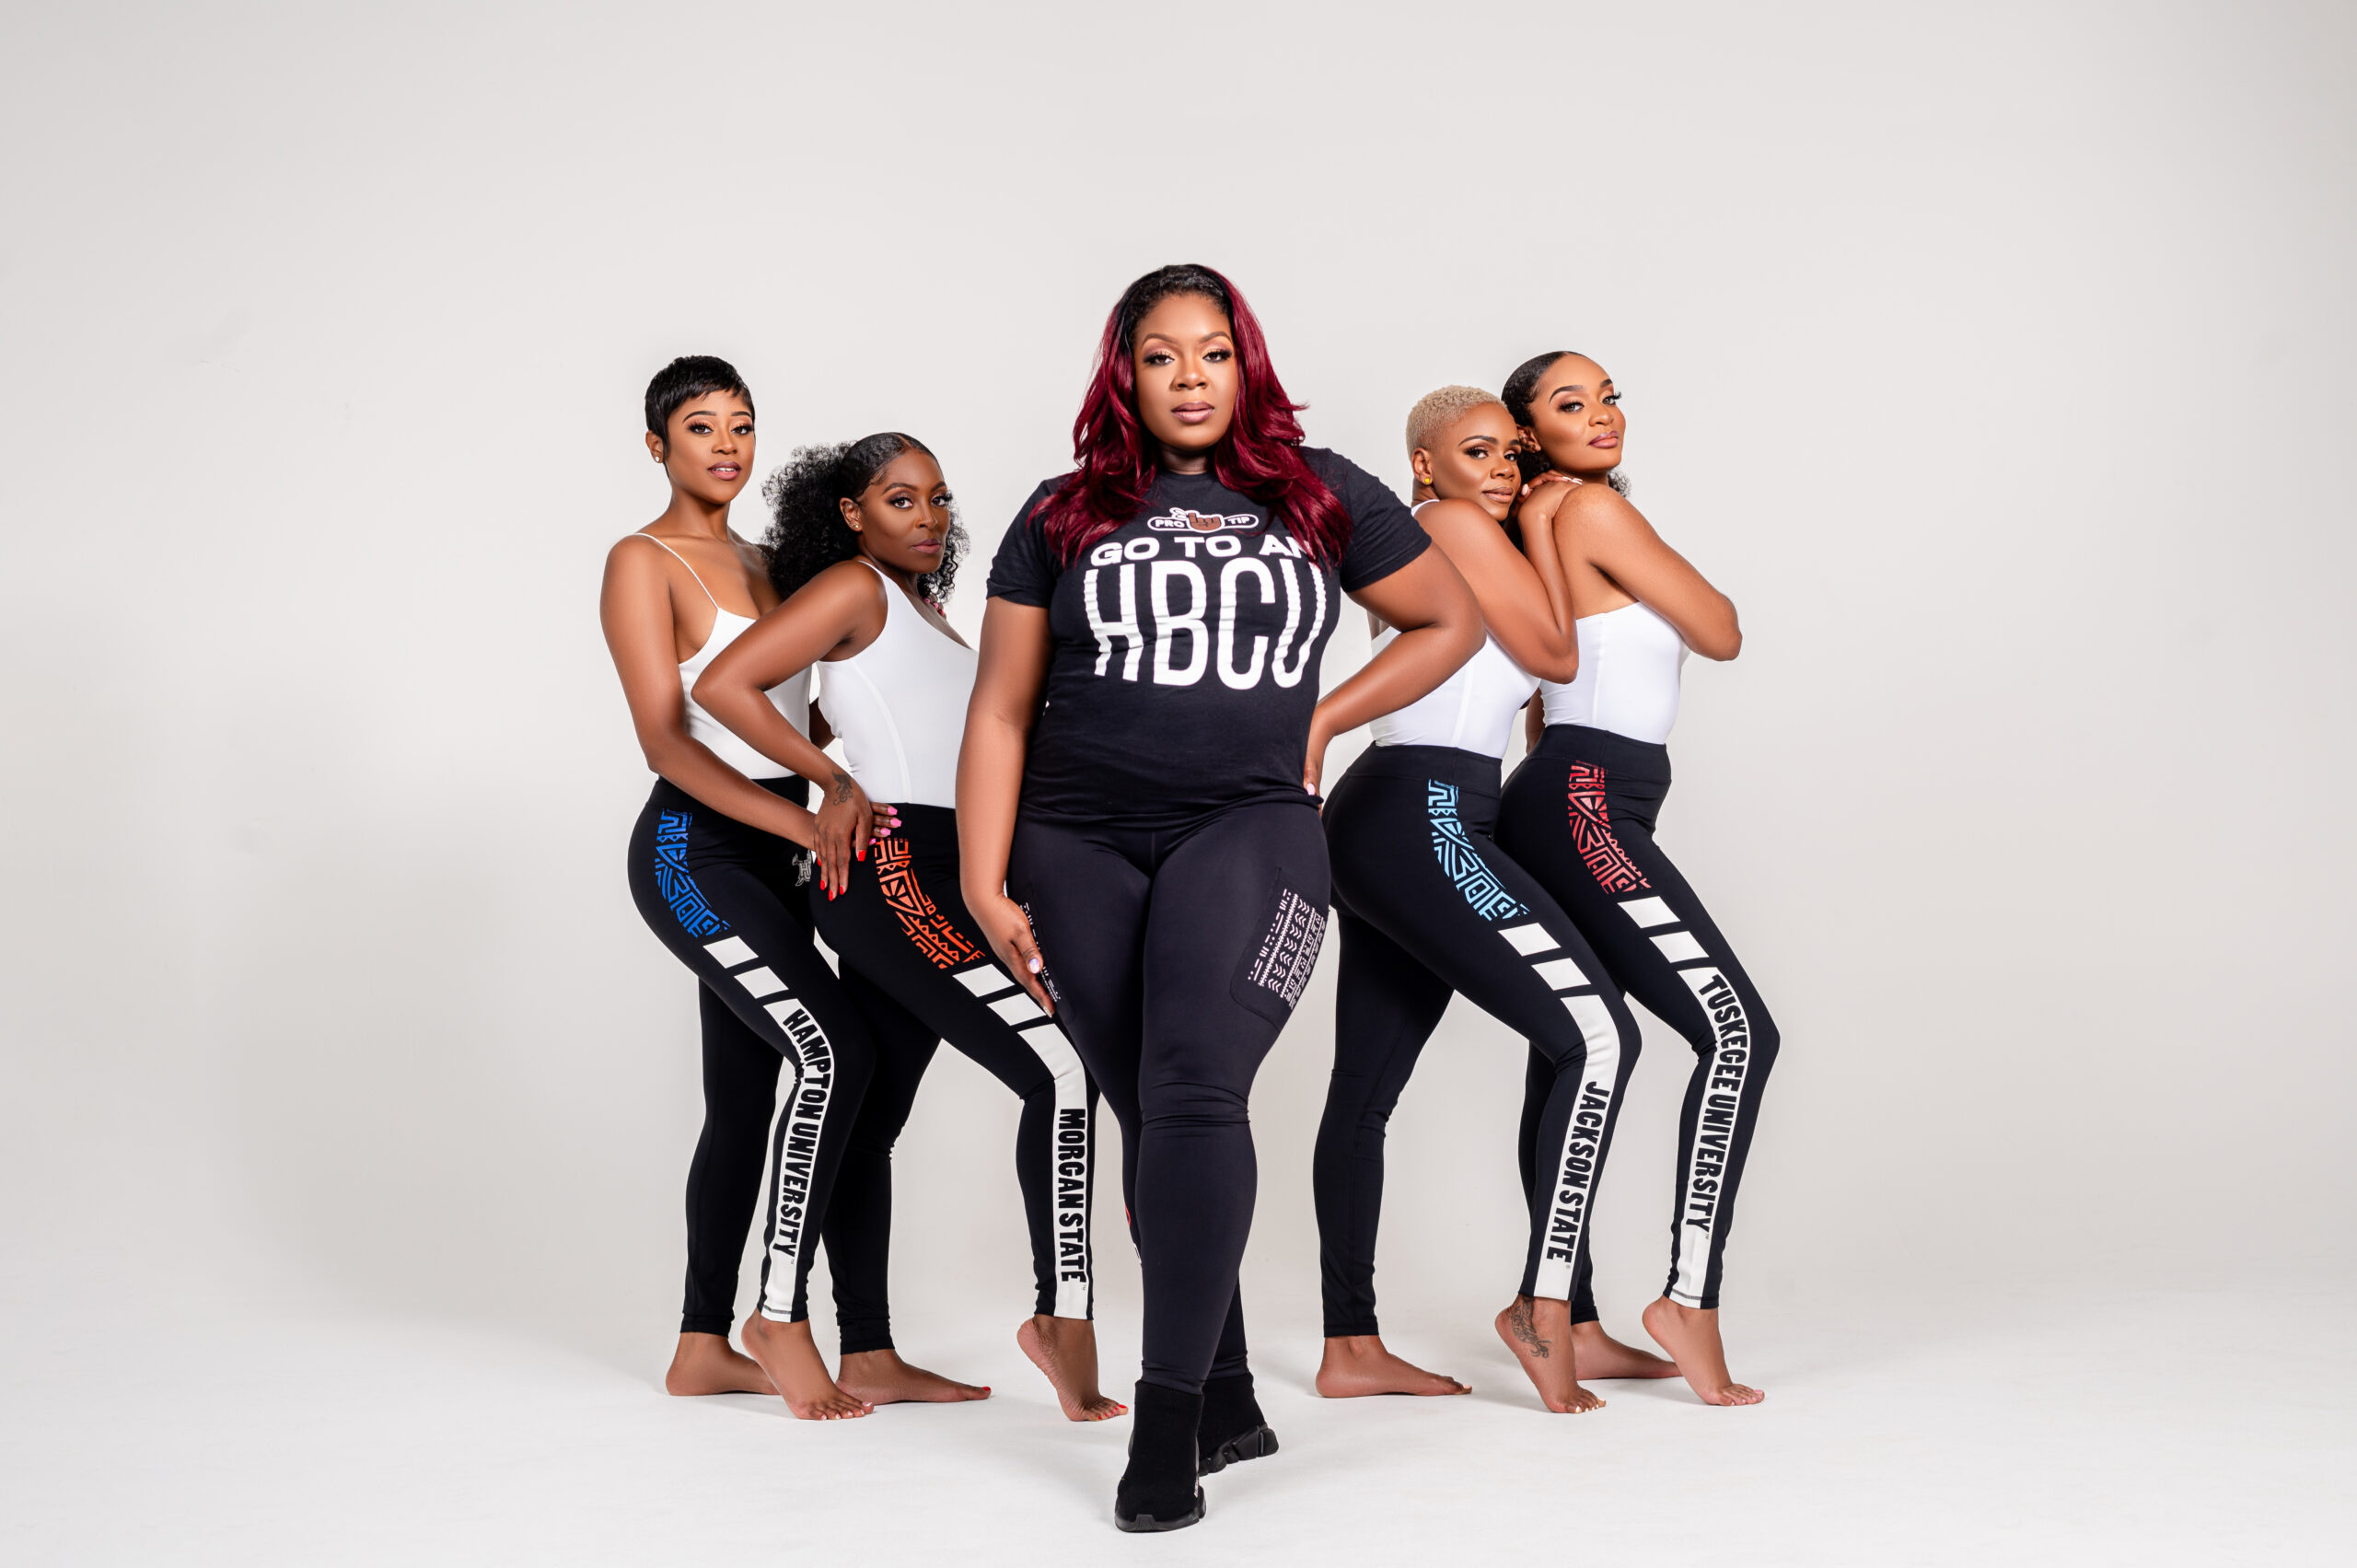 HBCU Leggings Brand Owner Amina Hammond Wants Alums to "Rock Your Legacy"